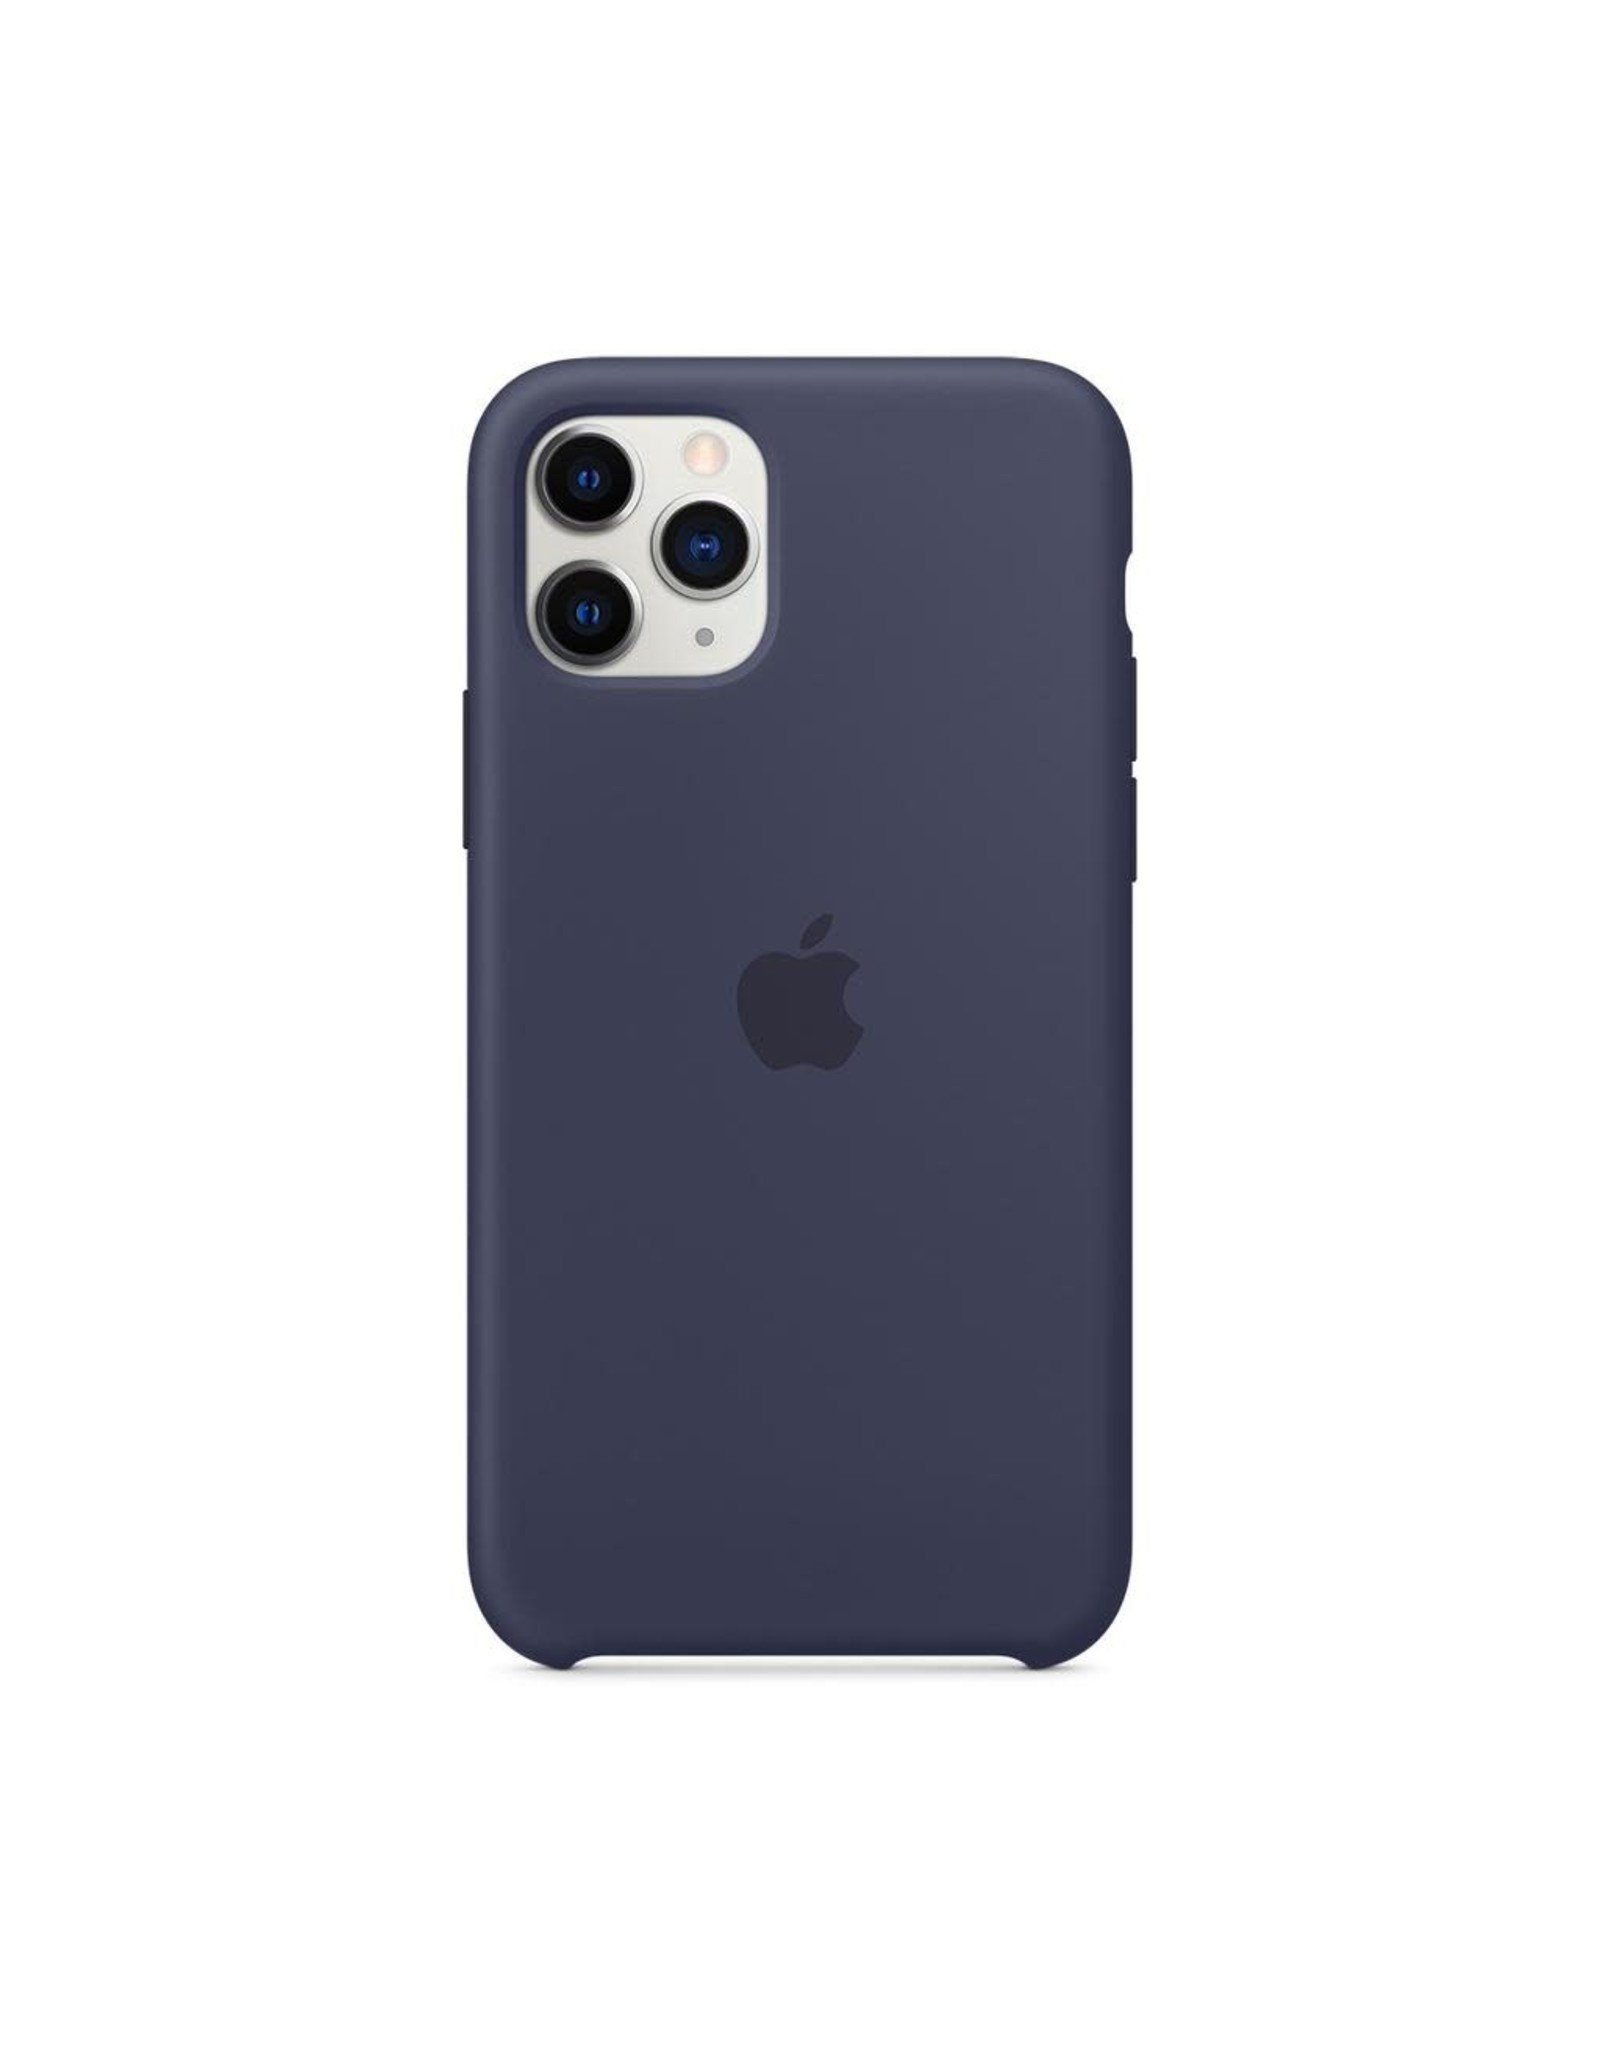 Apple Apple iPhone 11 Pro Silicone Case - MIDNIGHT BLUE